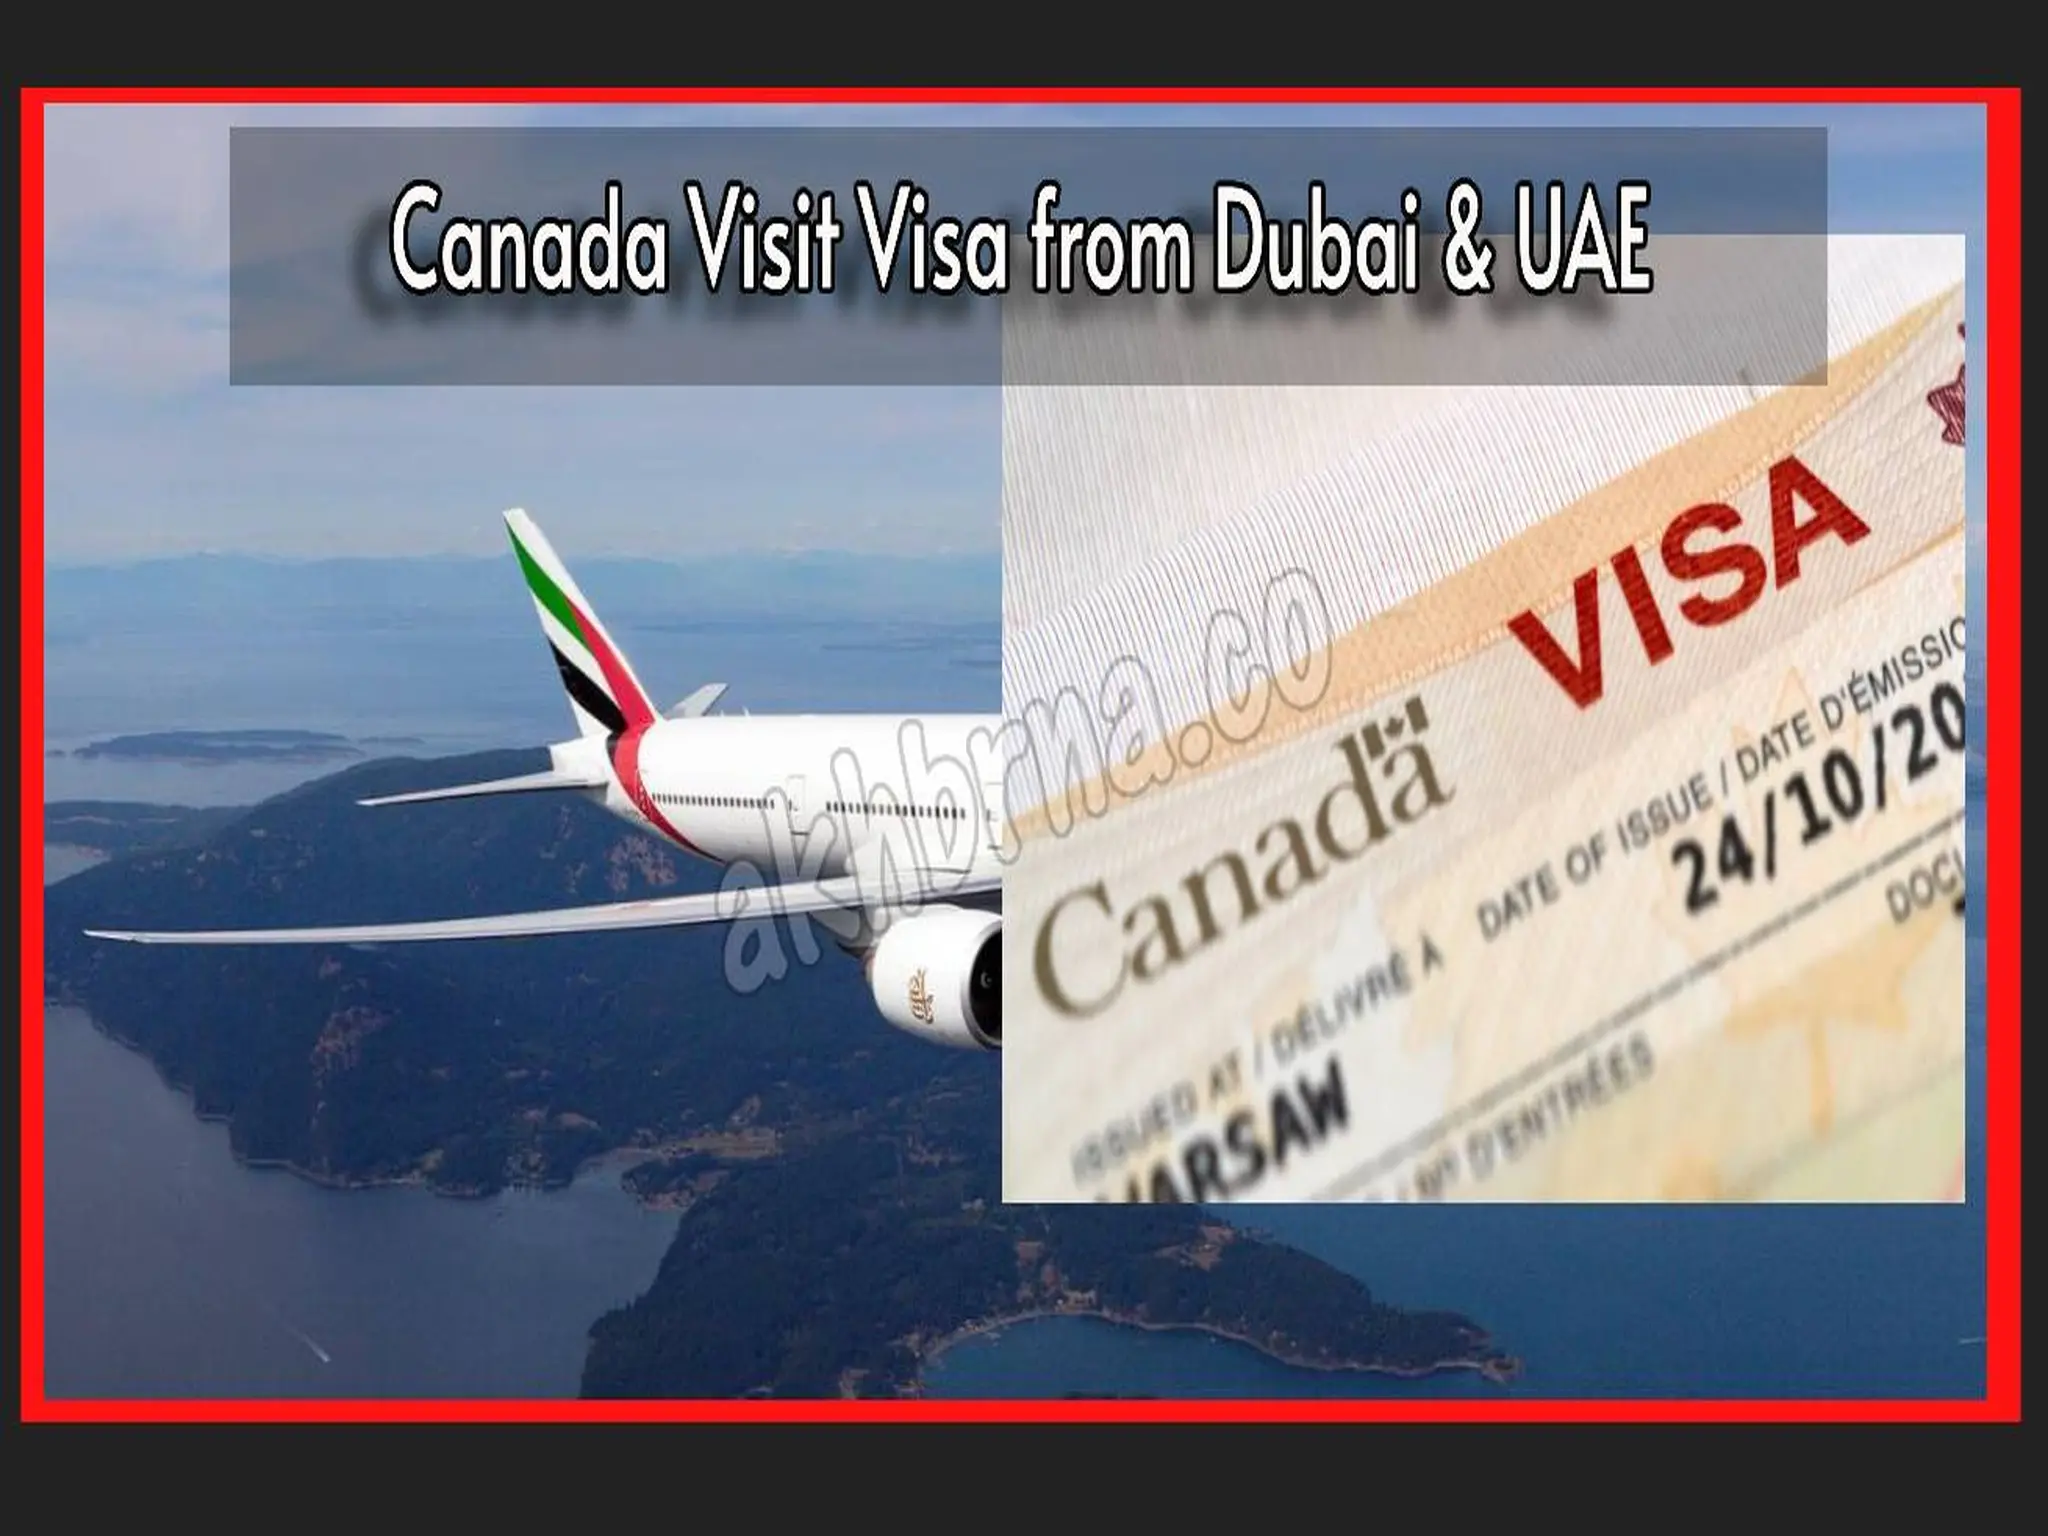 How to Apply for Canada Visit Visa from Dubai & UAE